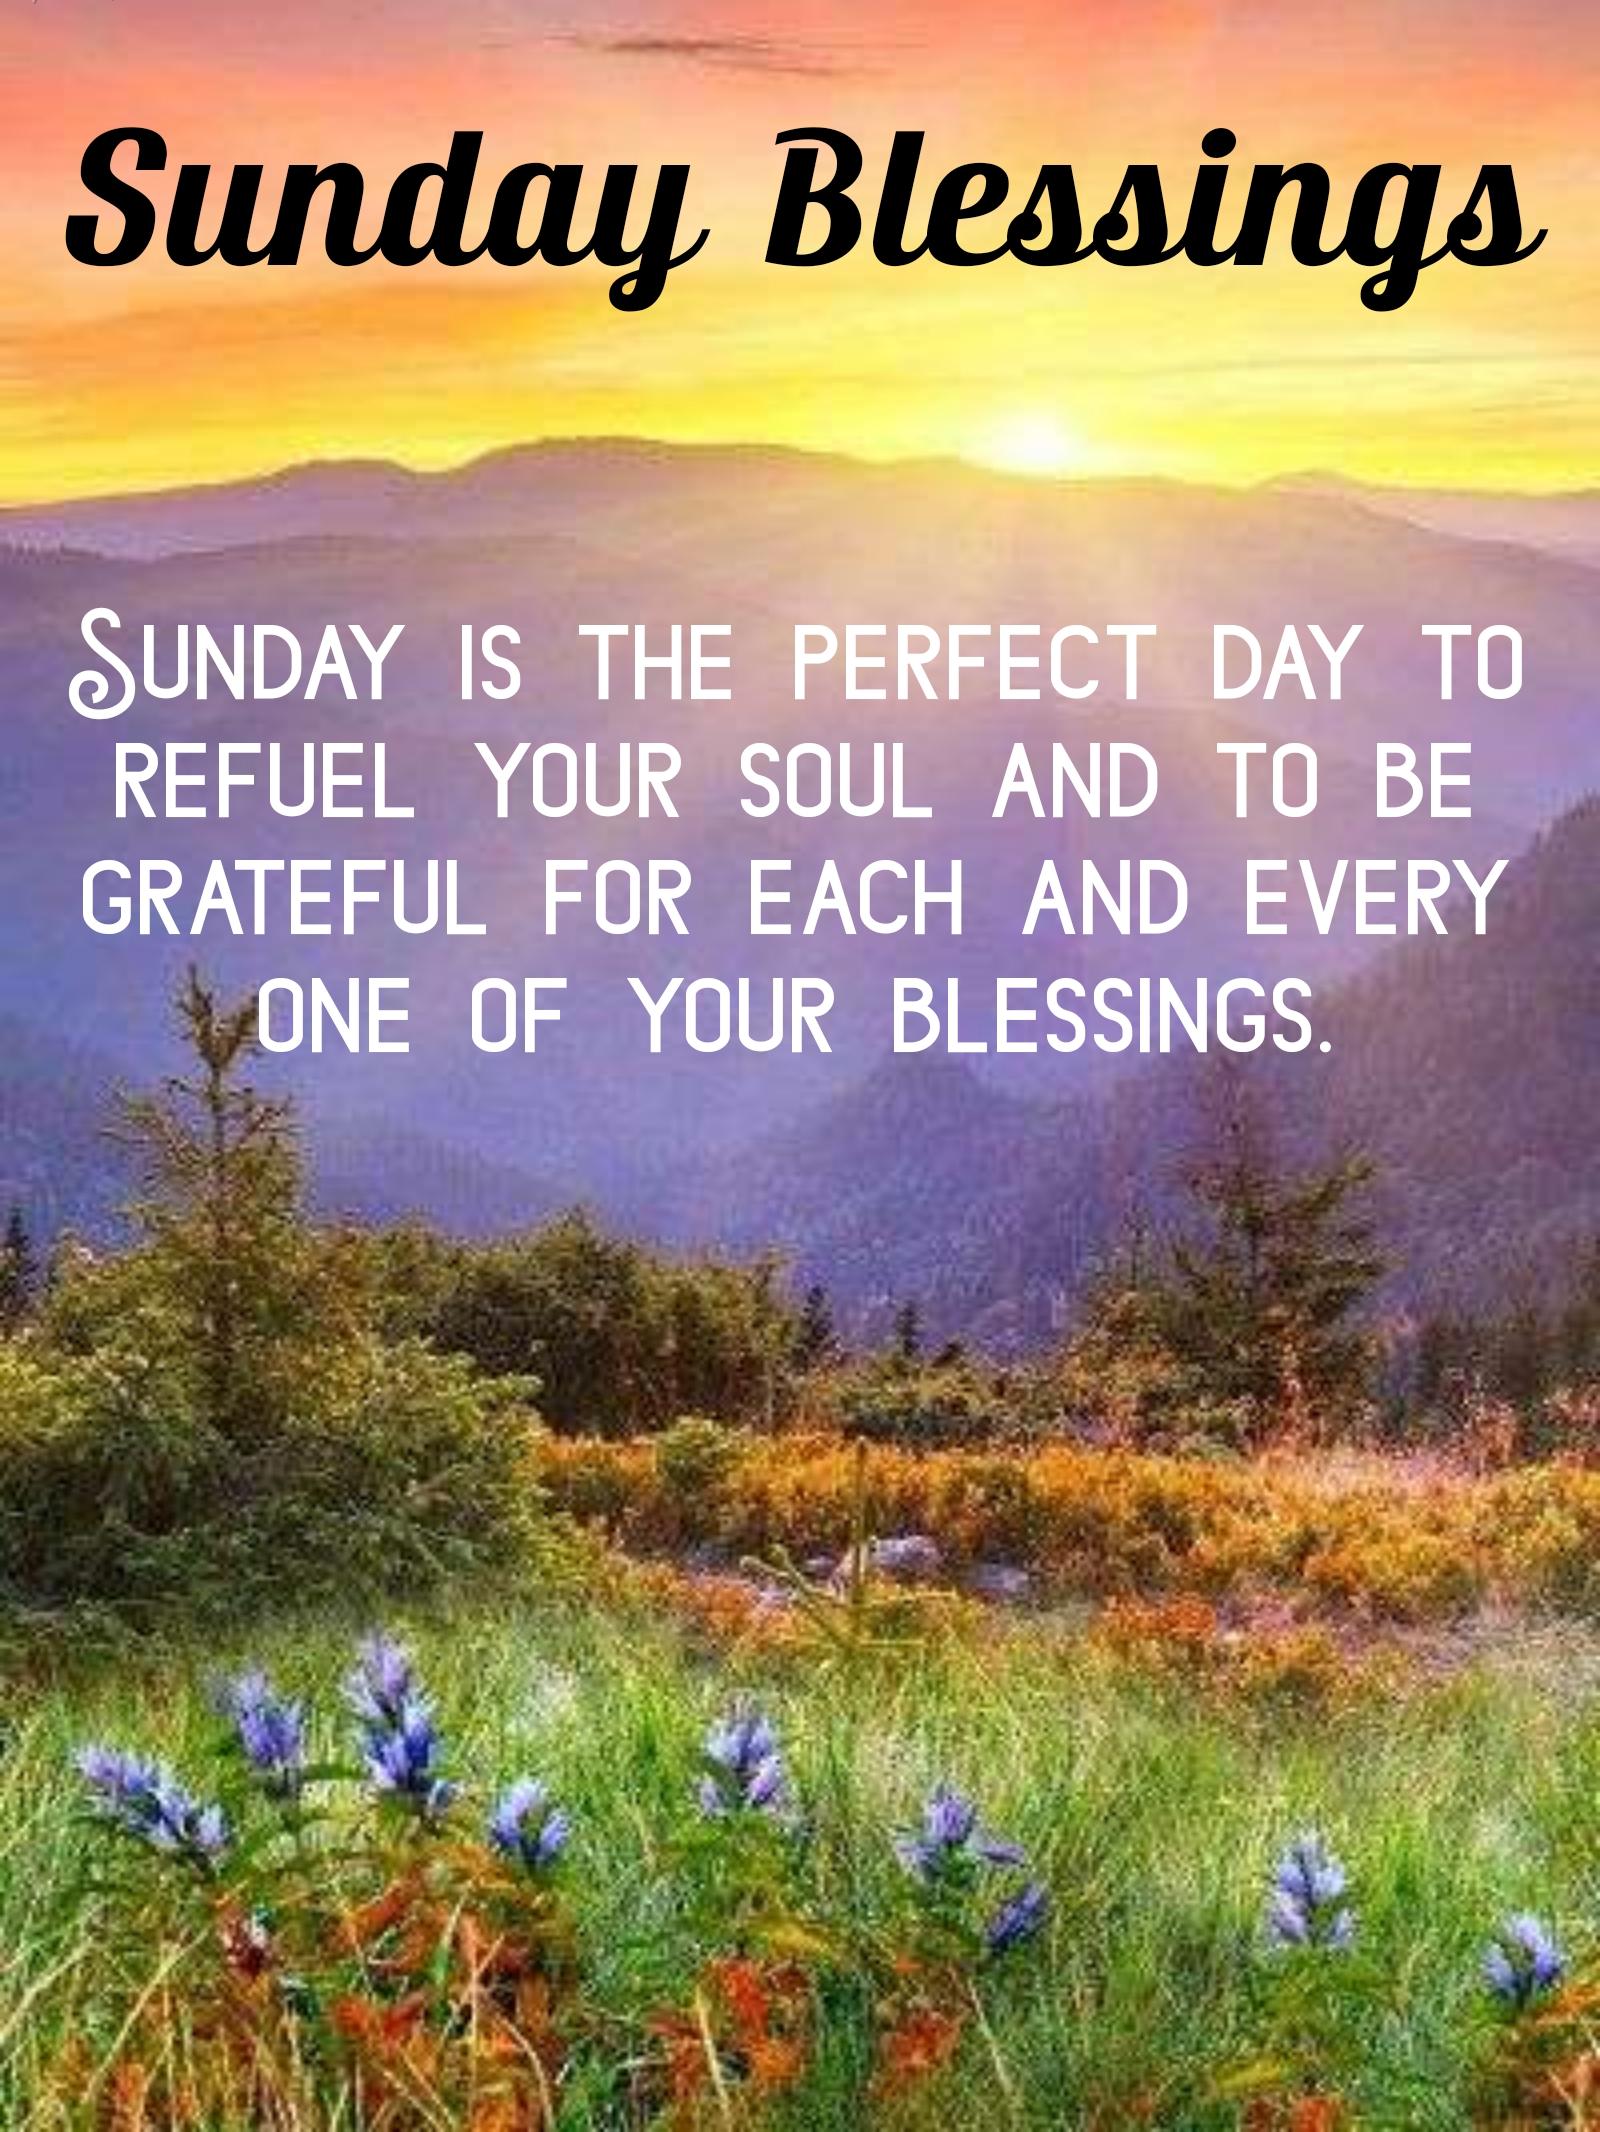 Sunday is the perfect day to do nothing and let your soul catch up with your…